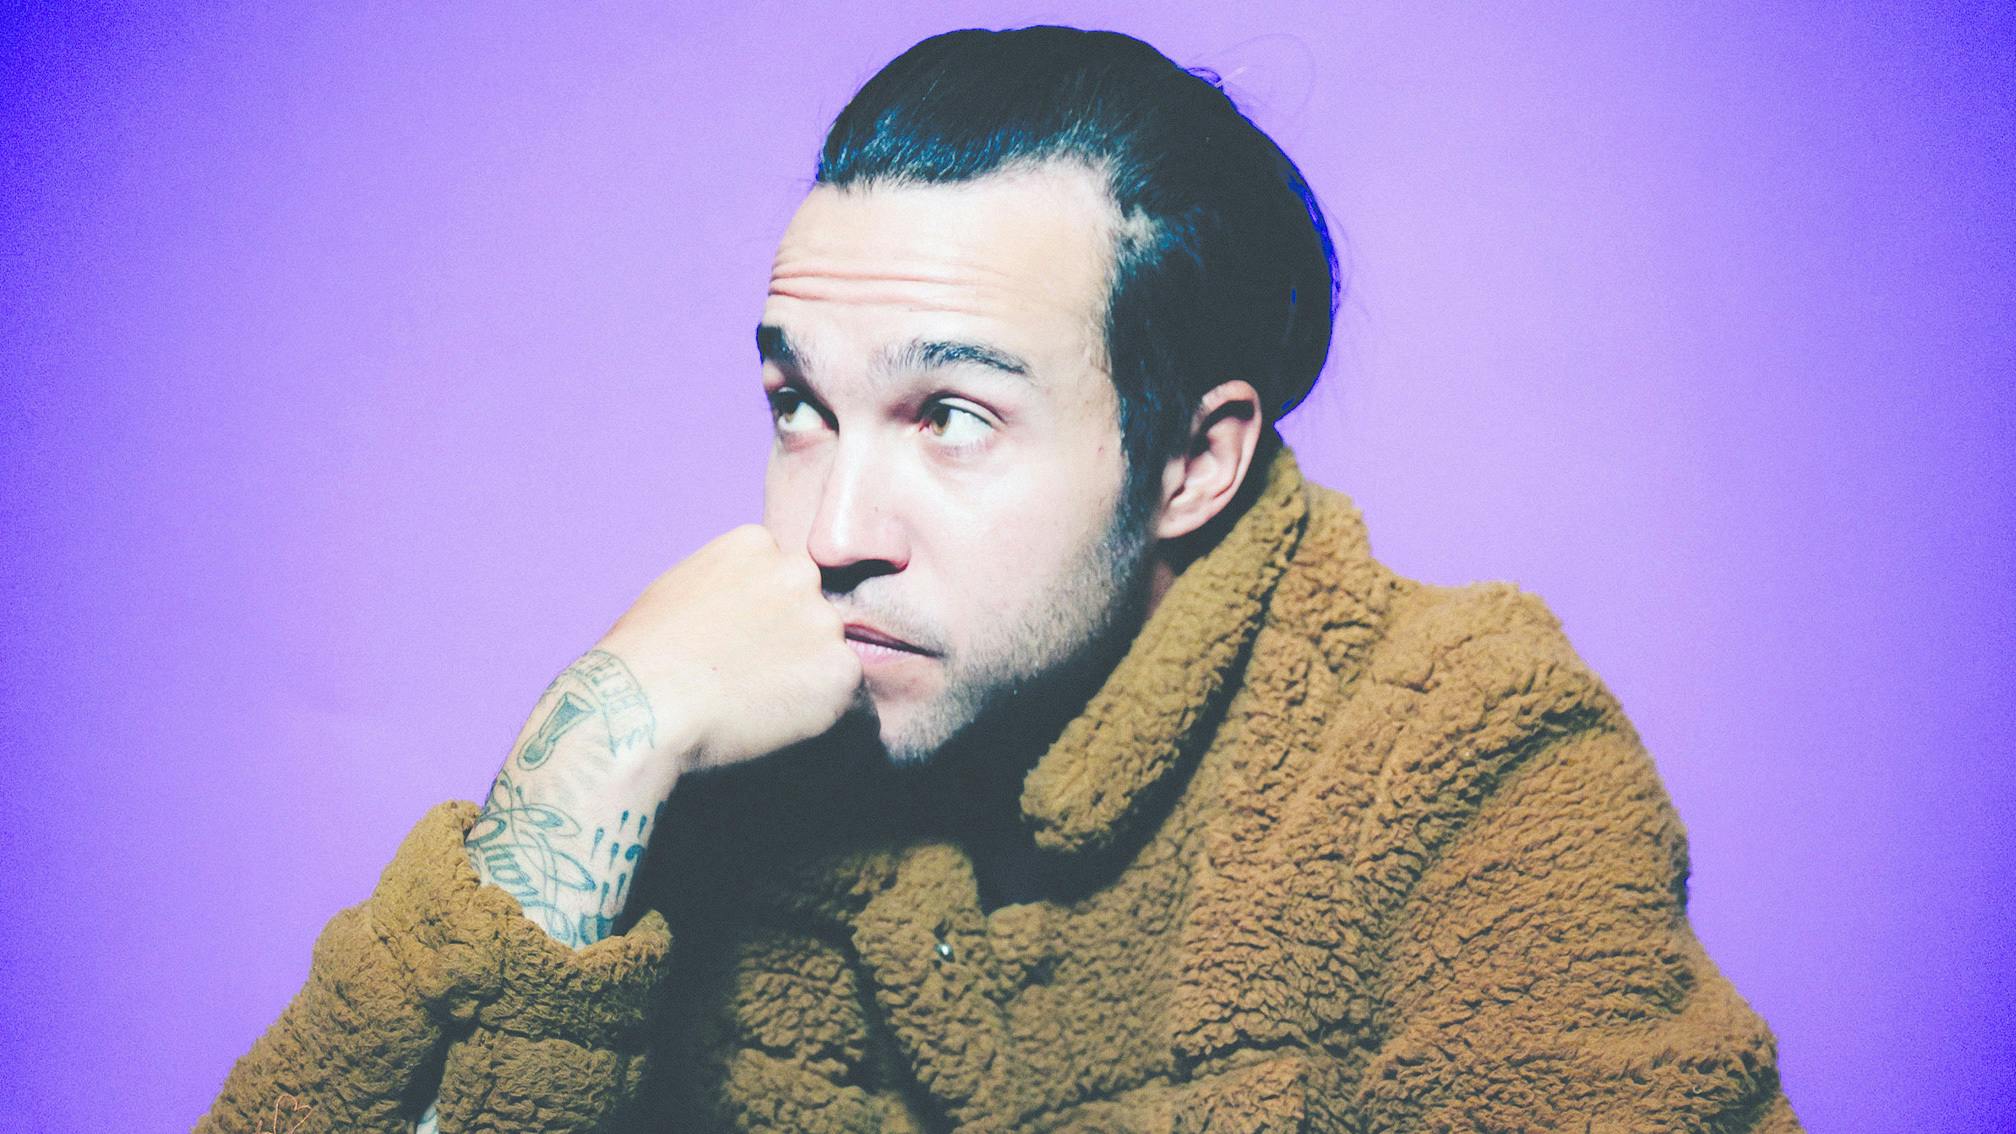 Fall Out Boy's Pete Wentz: "My fantasy is to go somewhere where no-one knows me, and just disappear"